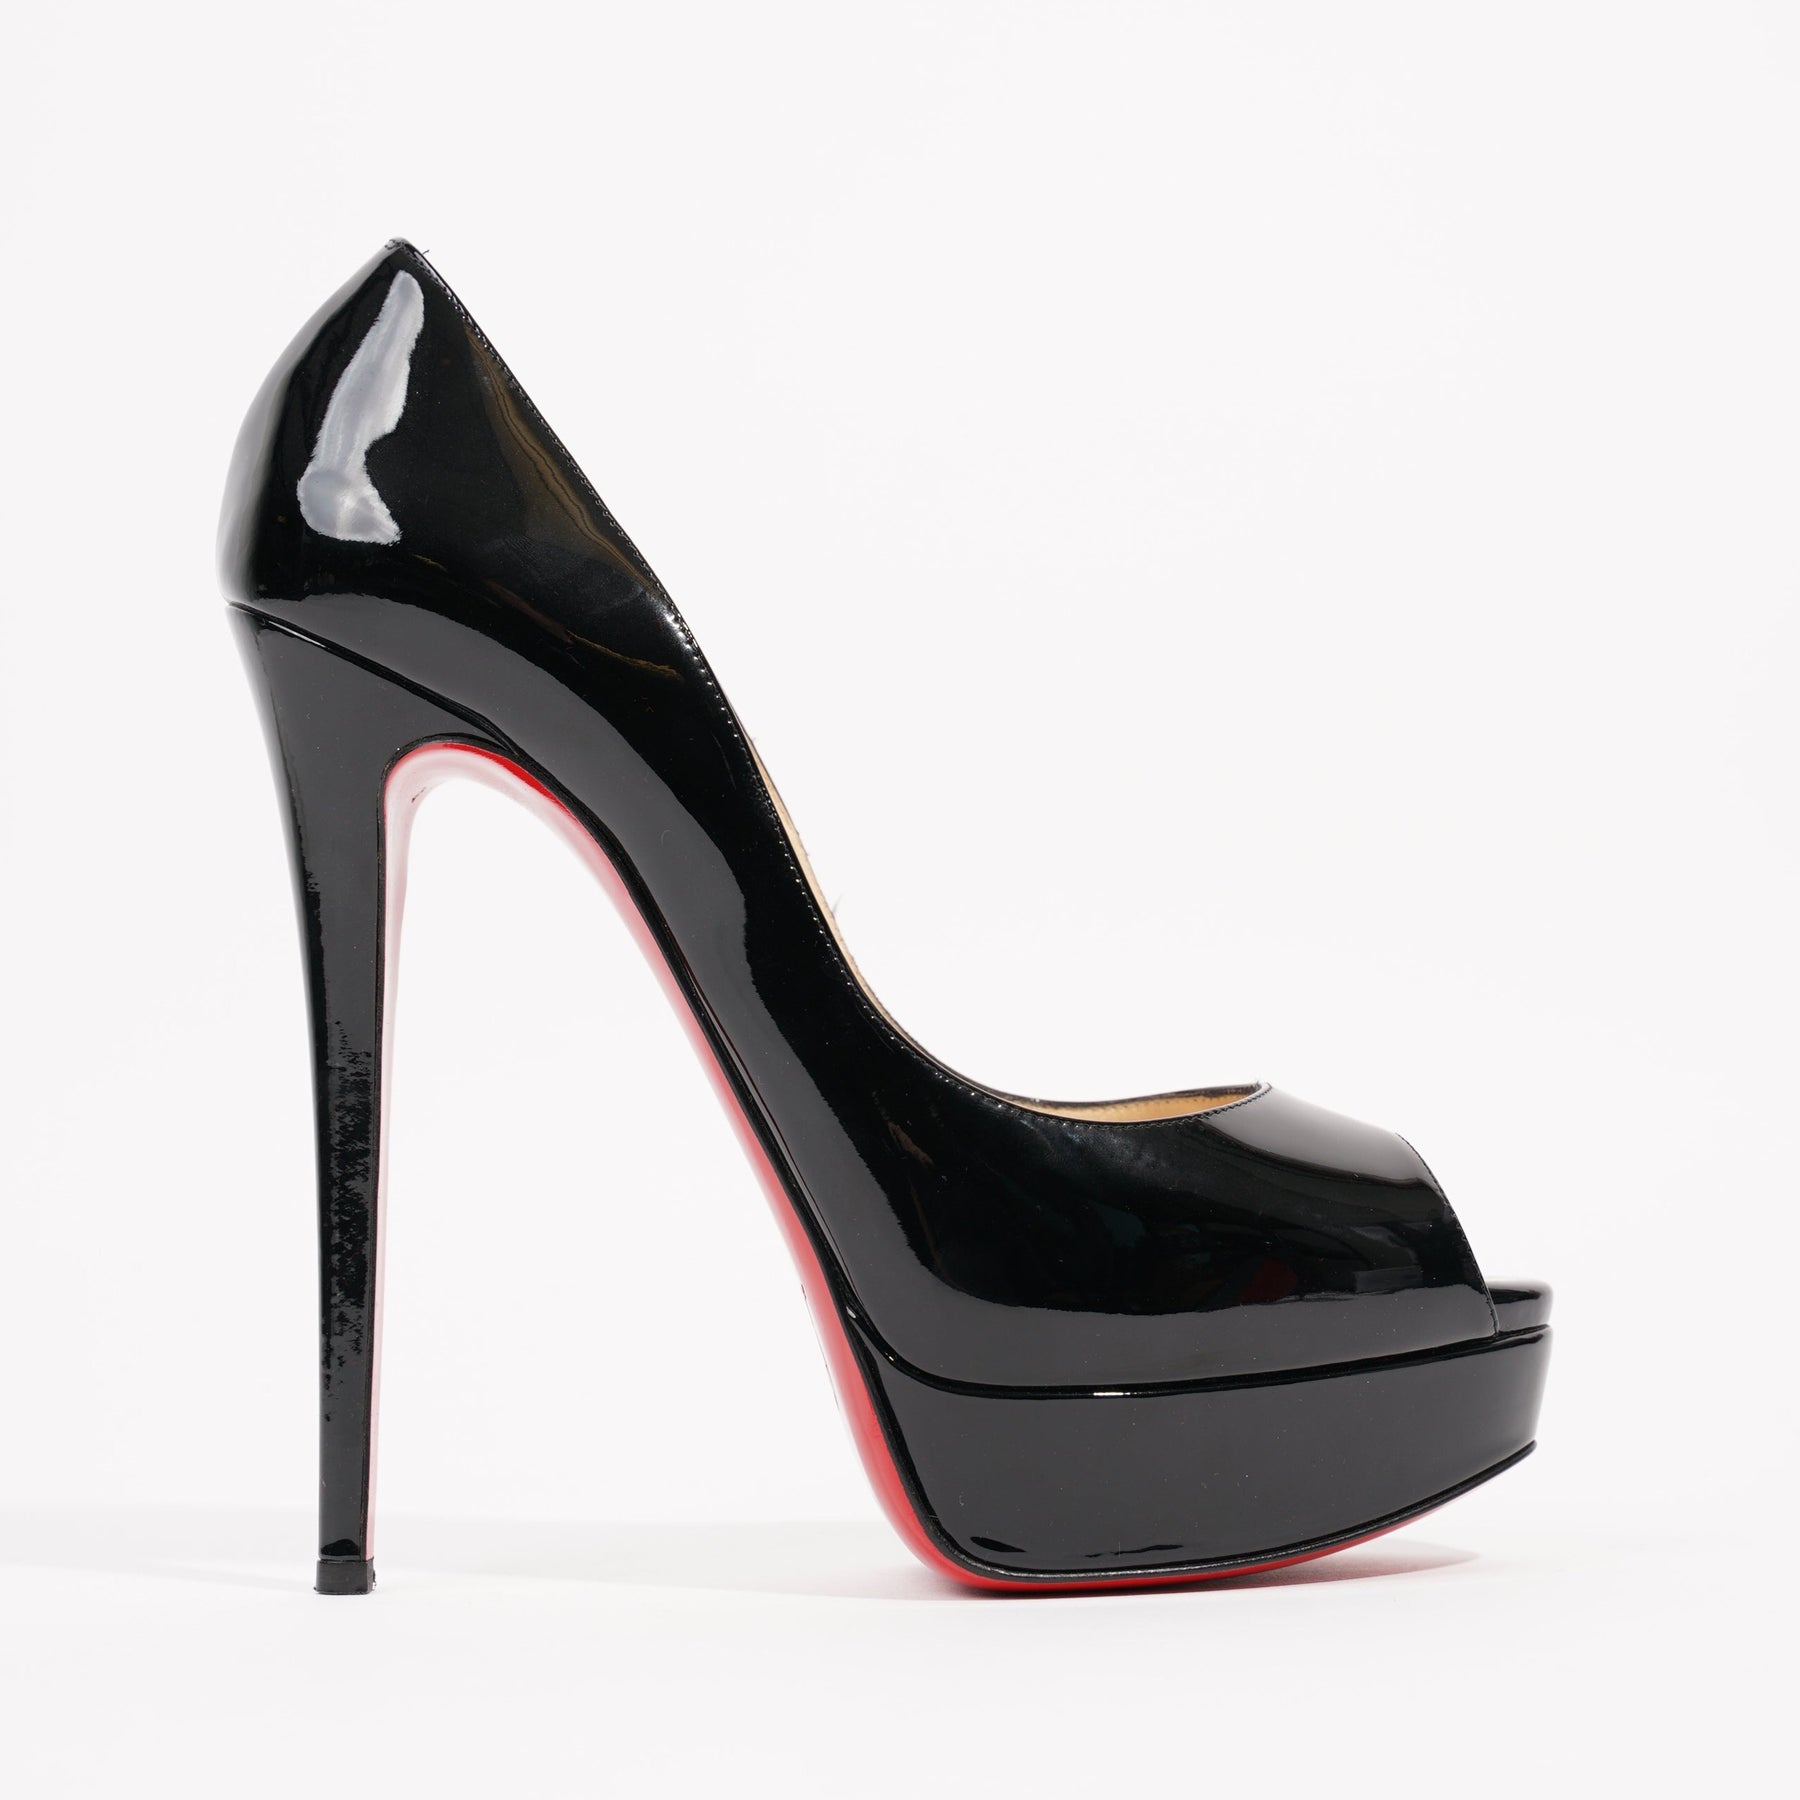 My Louboutin Fetish 150 Collection, any Ladies want to model them